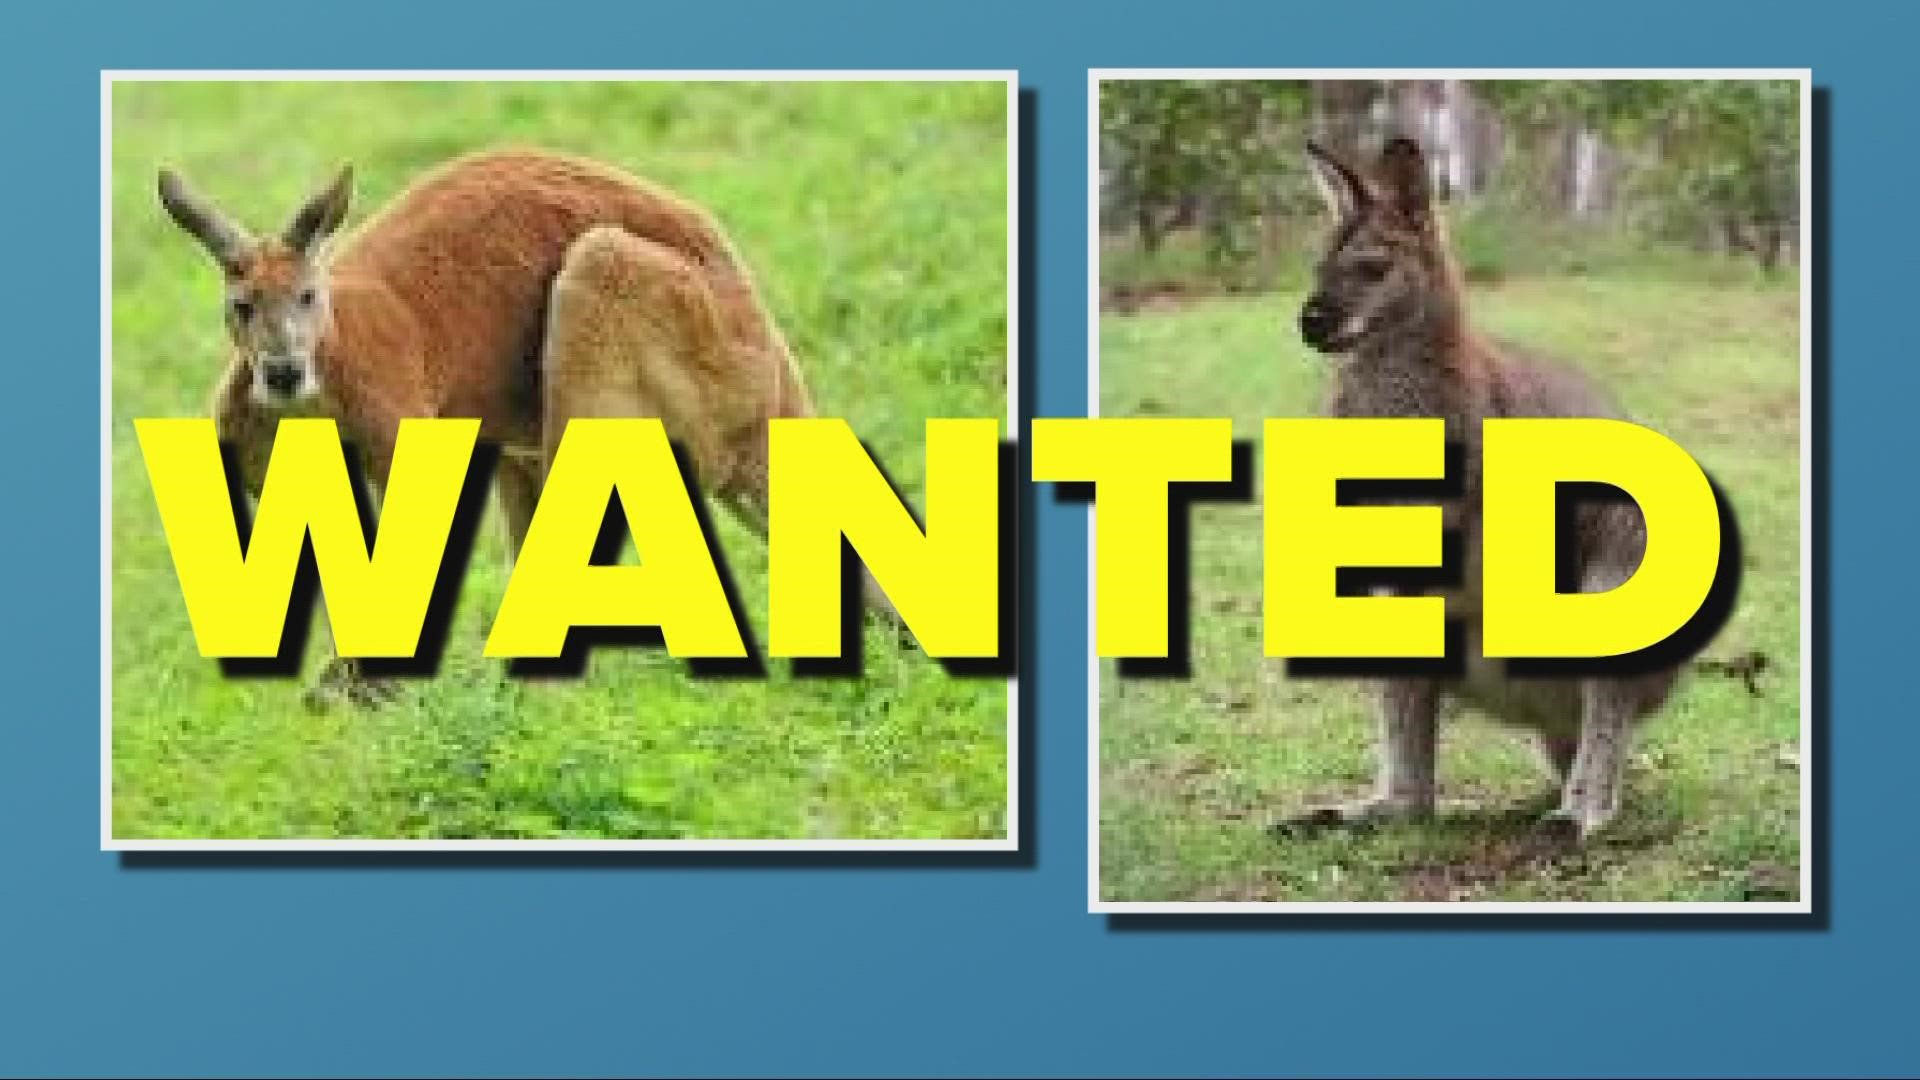 If you see the wallaby, do not chase or corner it.